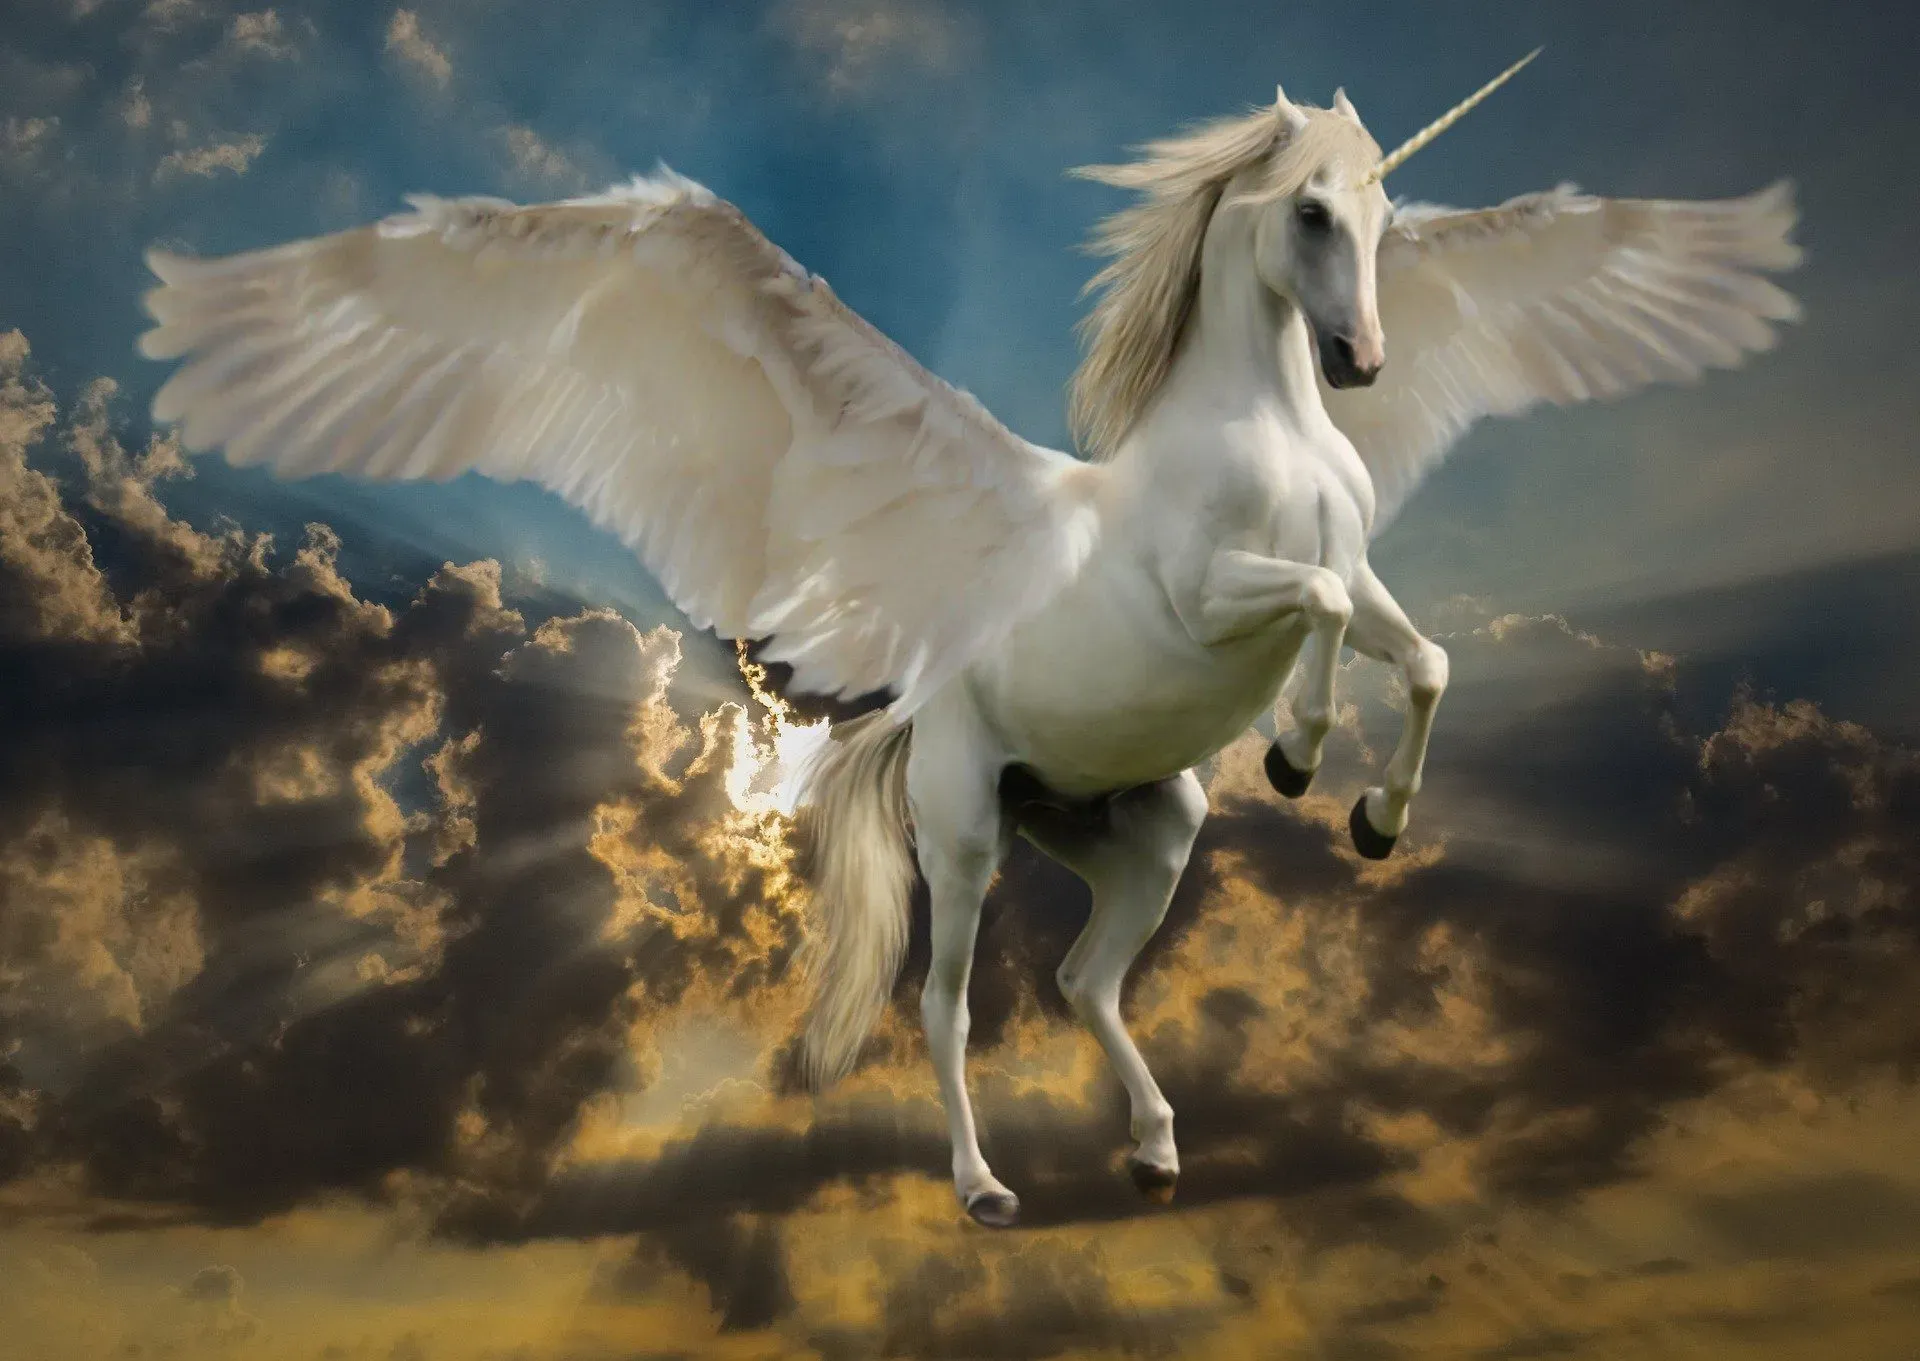 Unicorns, like dragons and mermaids, are among the most well-known legendary creatures in the world, so check out these unicorn facts!